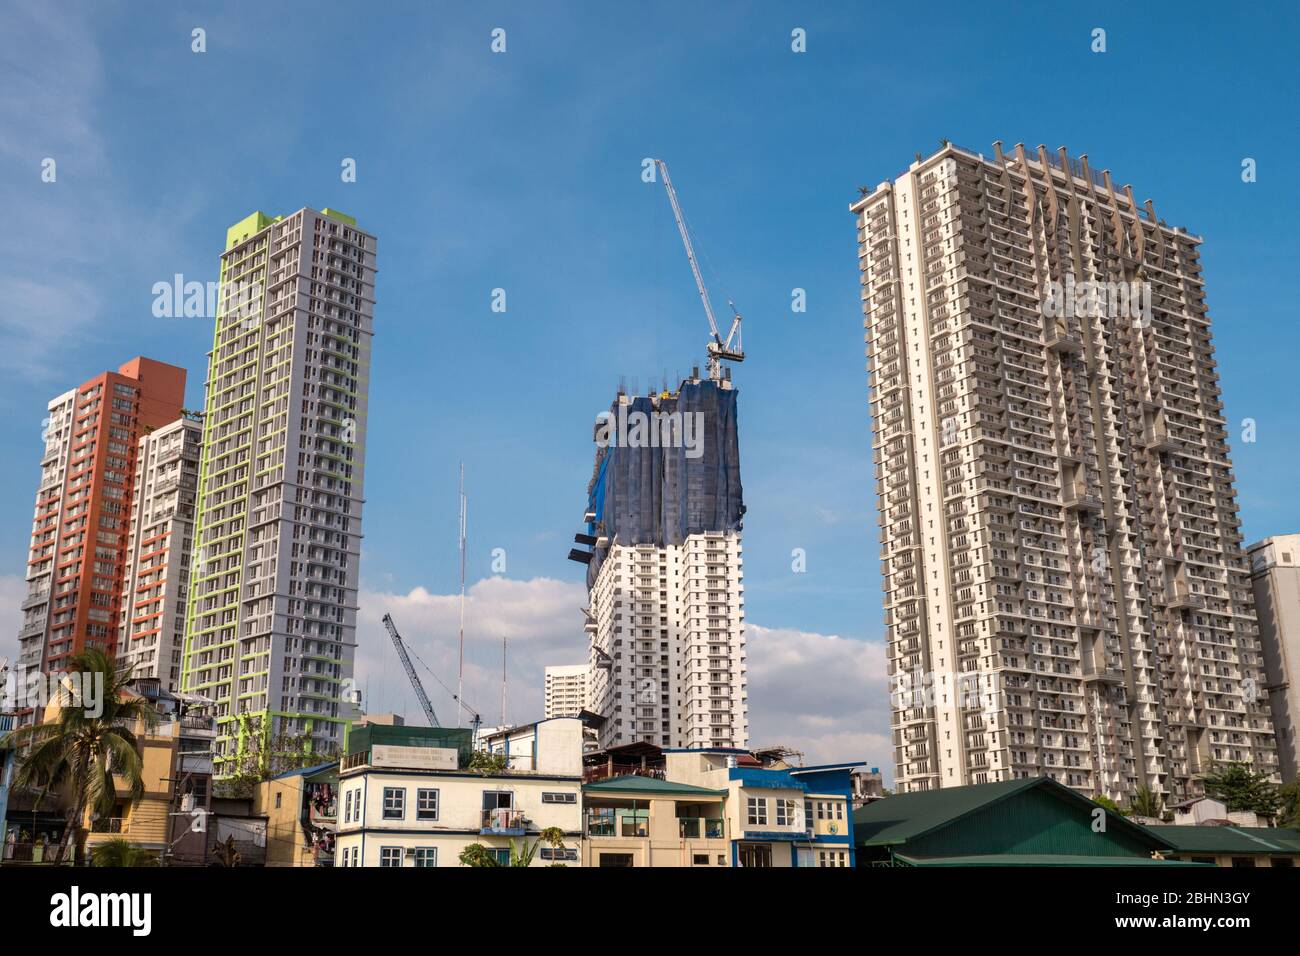 Manila, Philippines - March 15, 2018: Cityscape of skyscrapers in business district of Mandaluyong, blue sky Stock Photo